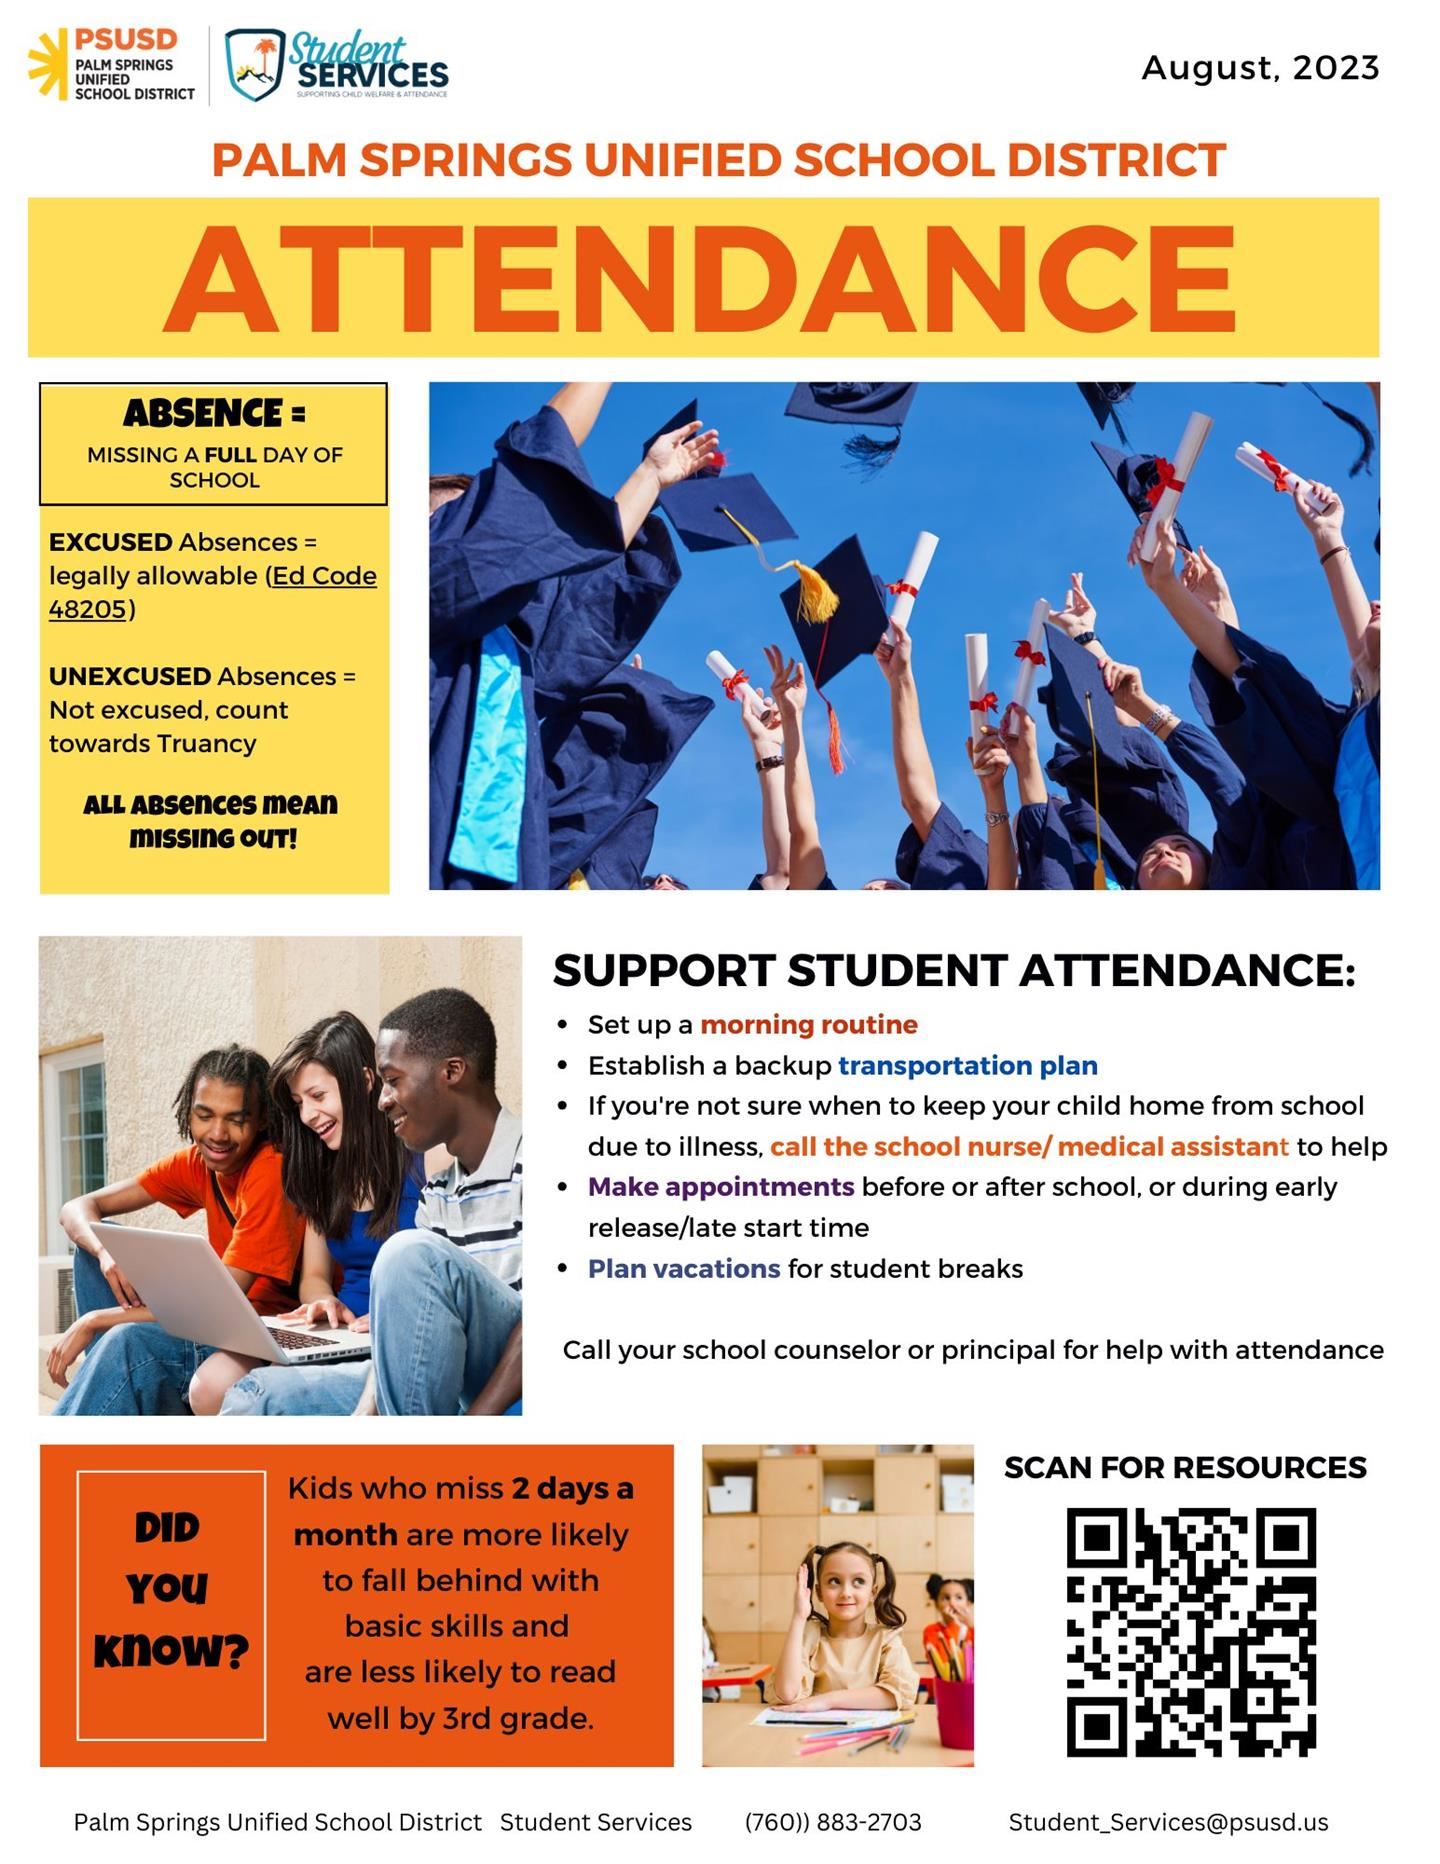  Attendance Matters Information. Please see entire article for more information